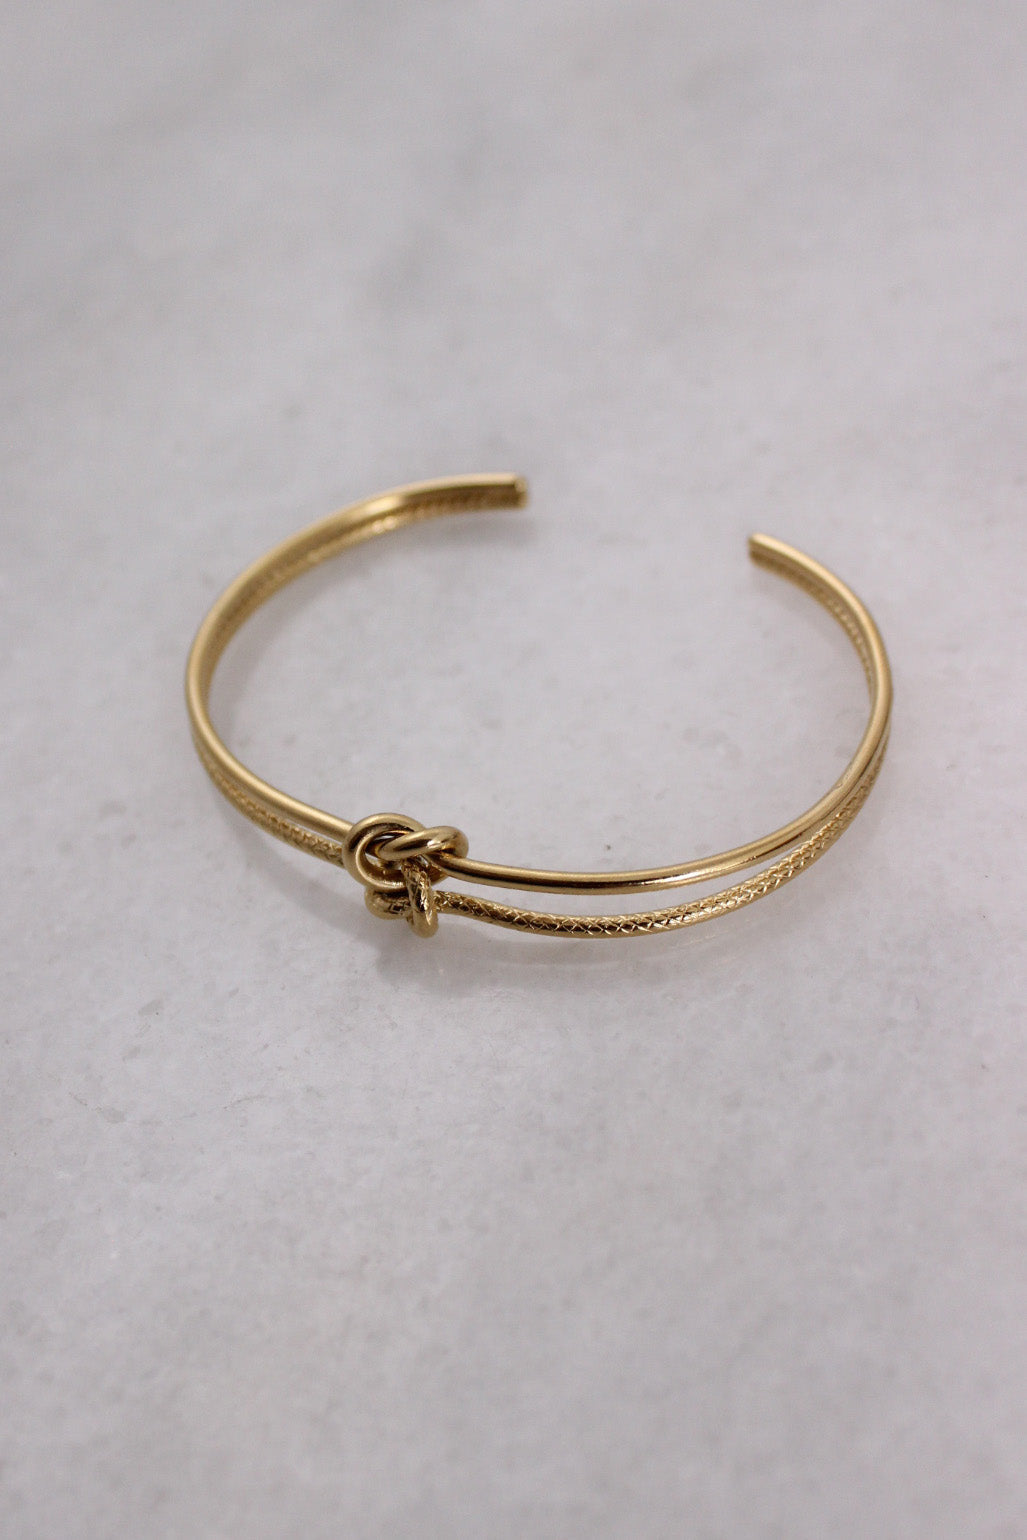 three-quarter front angle of gold-toned metal bracelet featuring smooth/textured base and knotted embellishment at center.